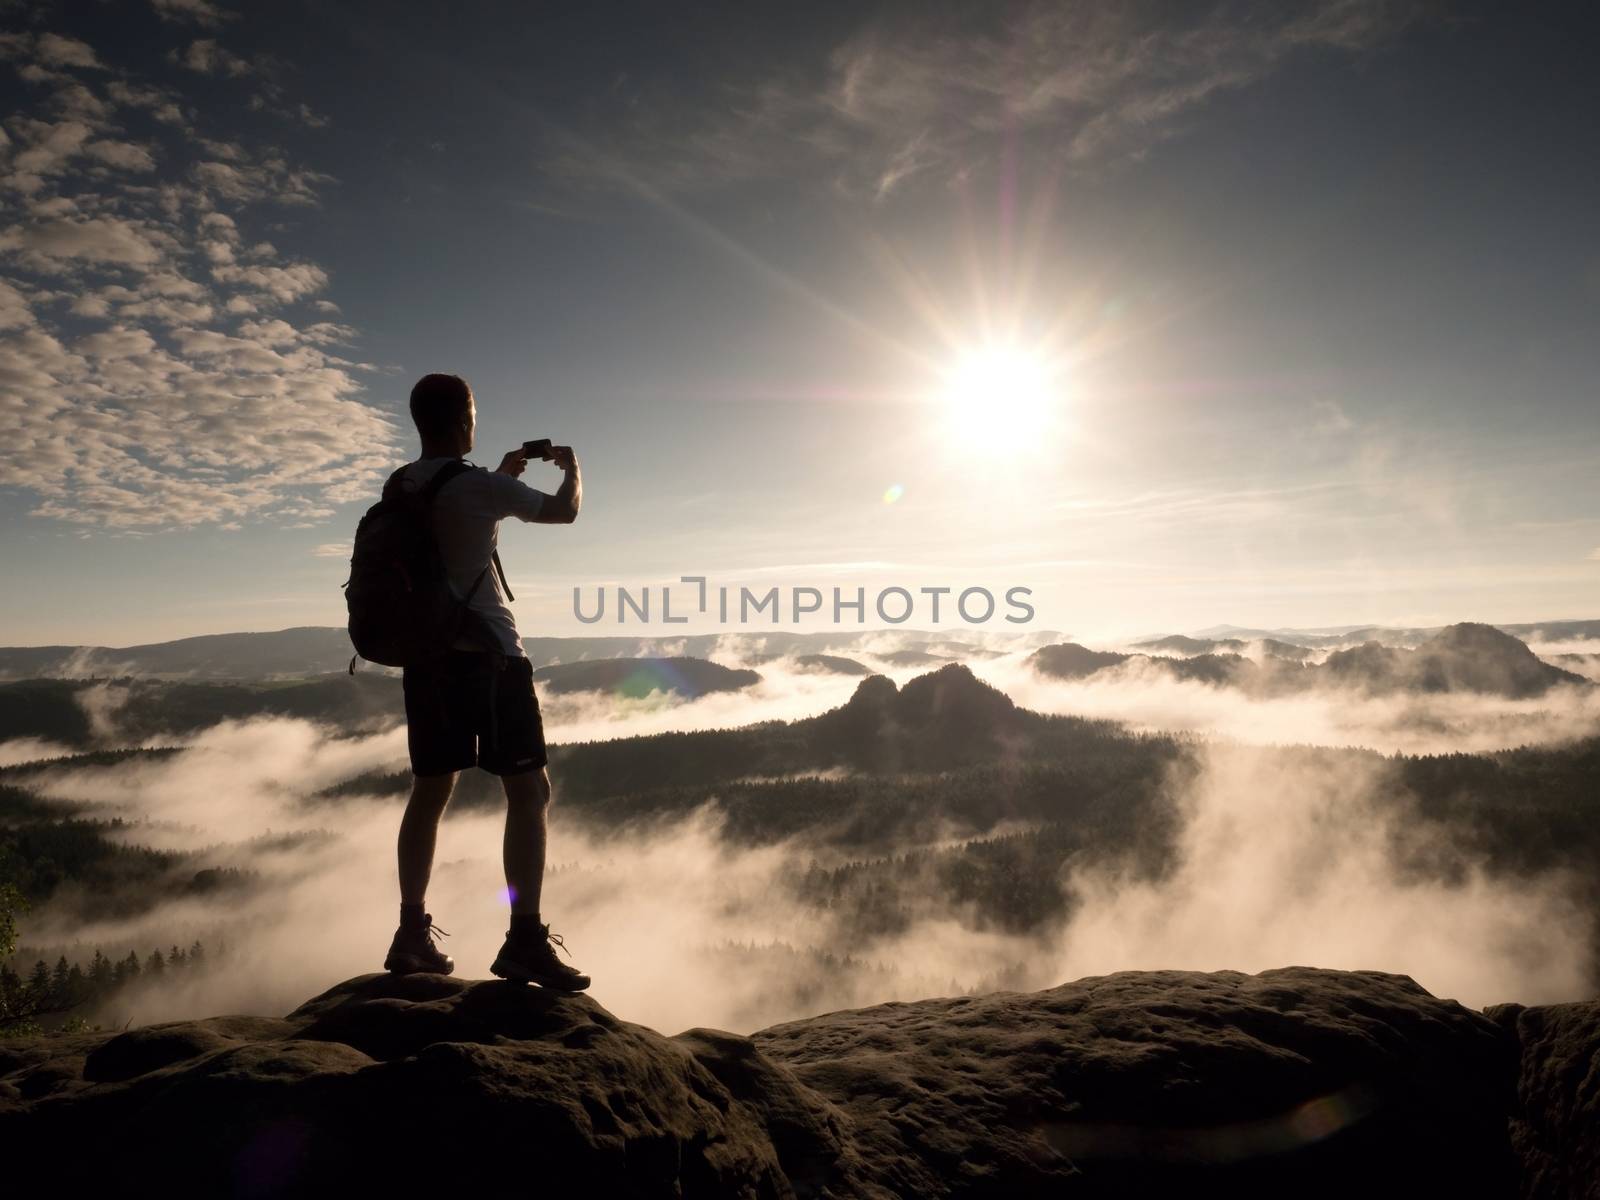 Man at the top of a mountain looking the misty landscape. Feel free by rdonar2